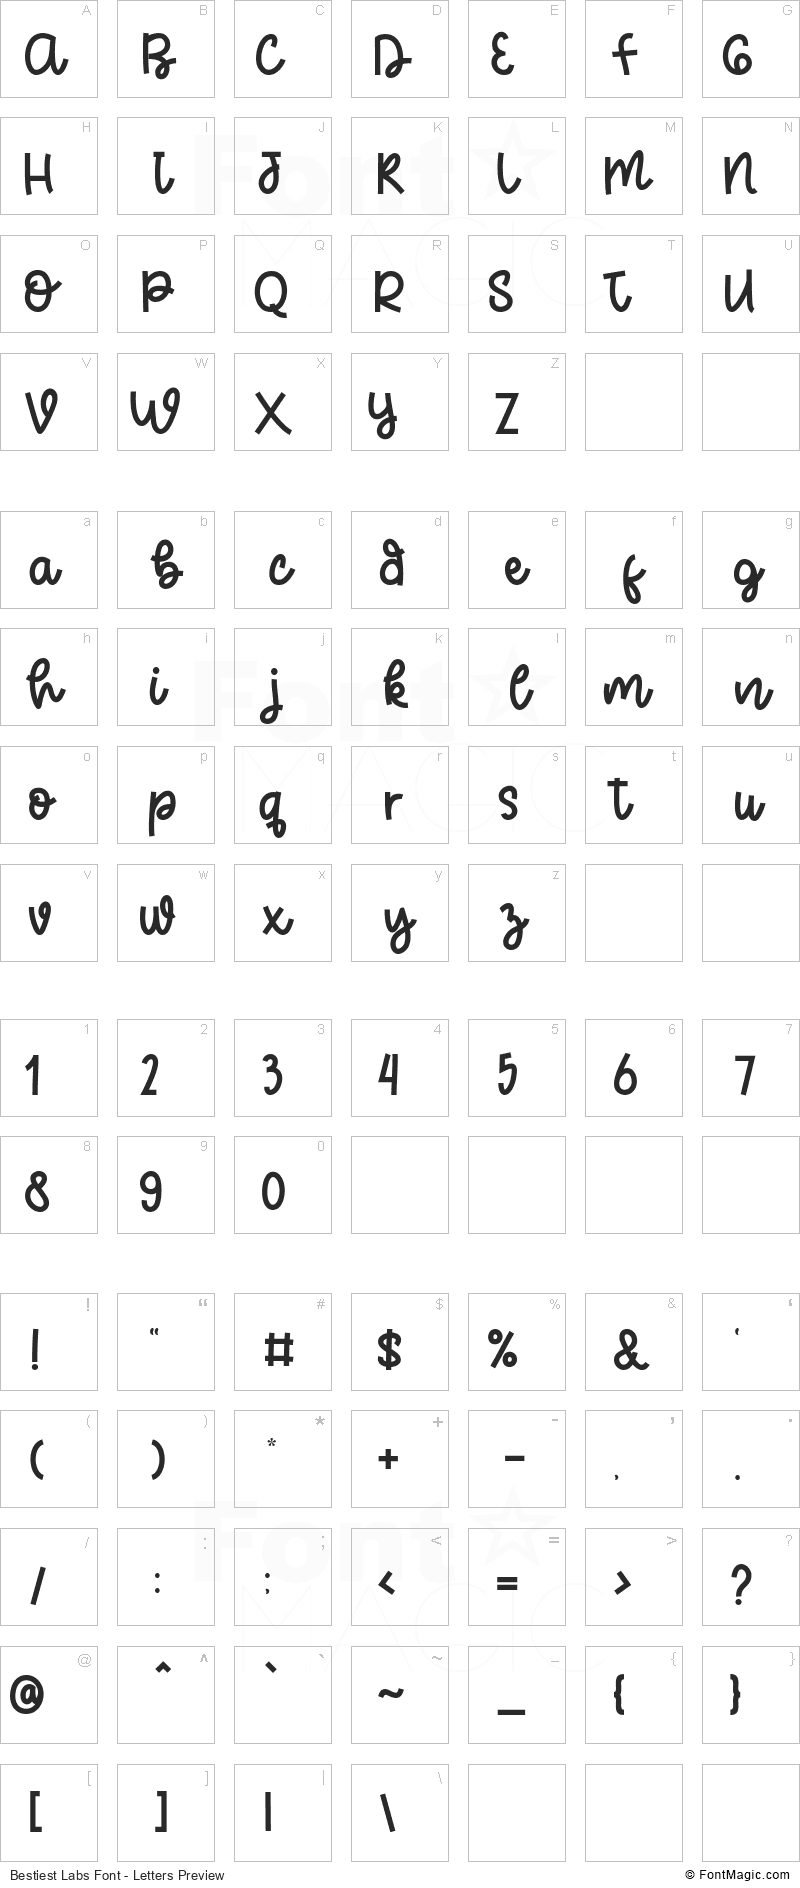 Bestiest Labs Font - All Latters Preview Chart